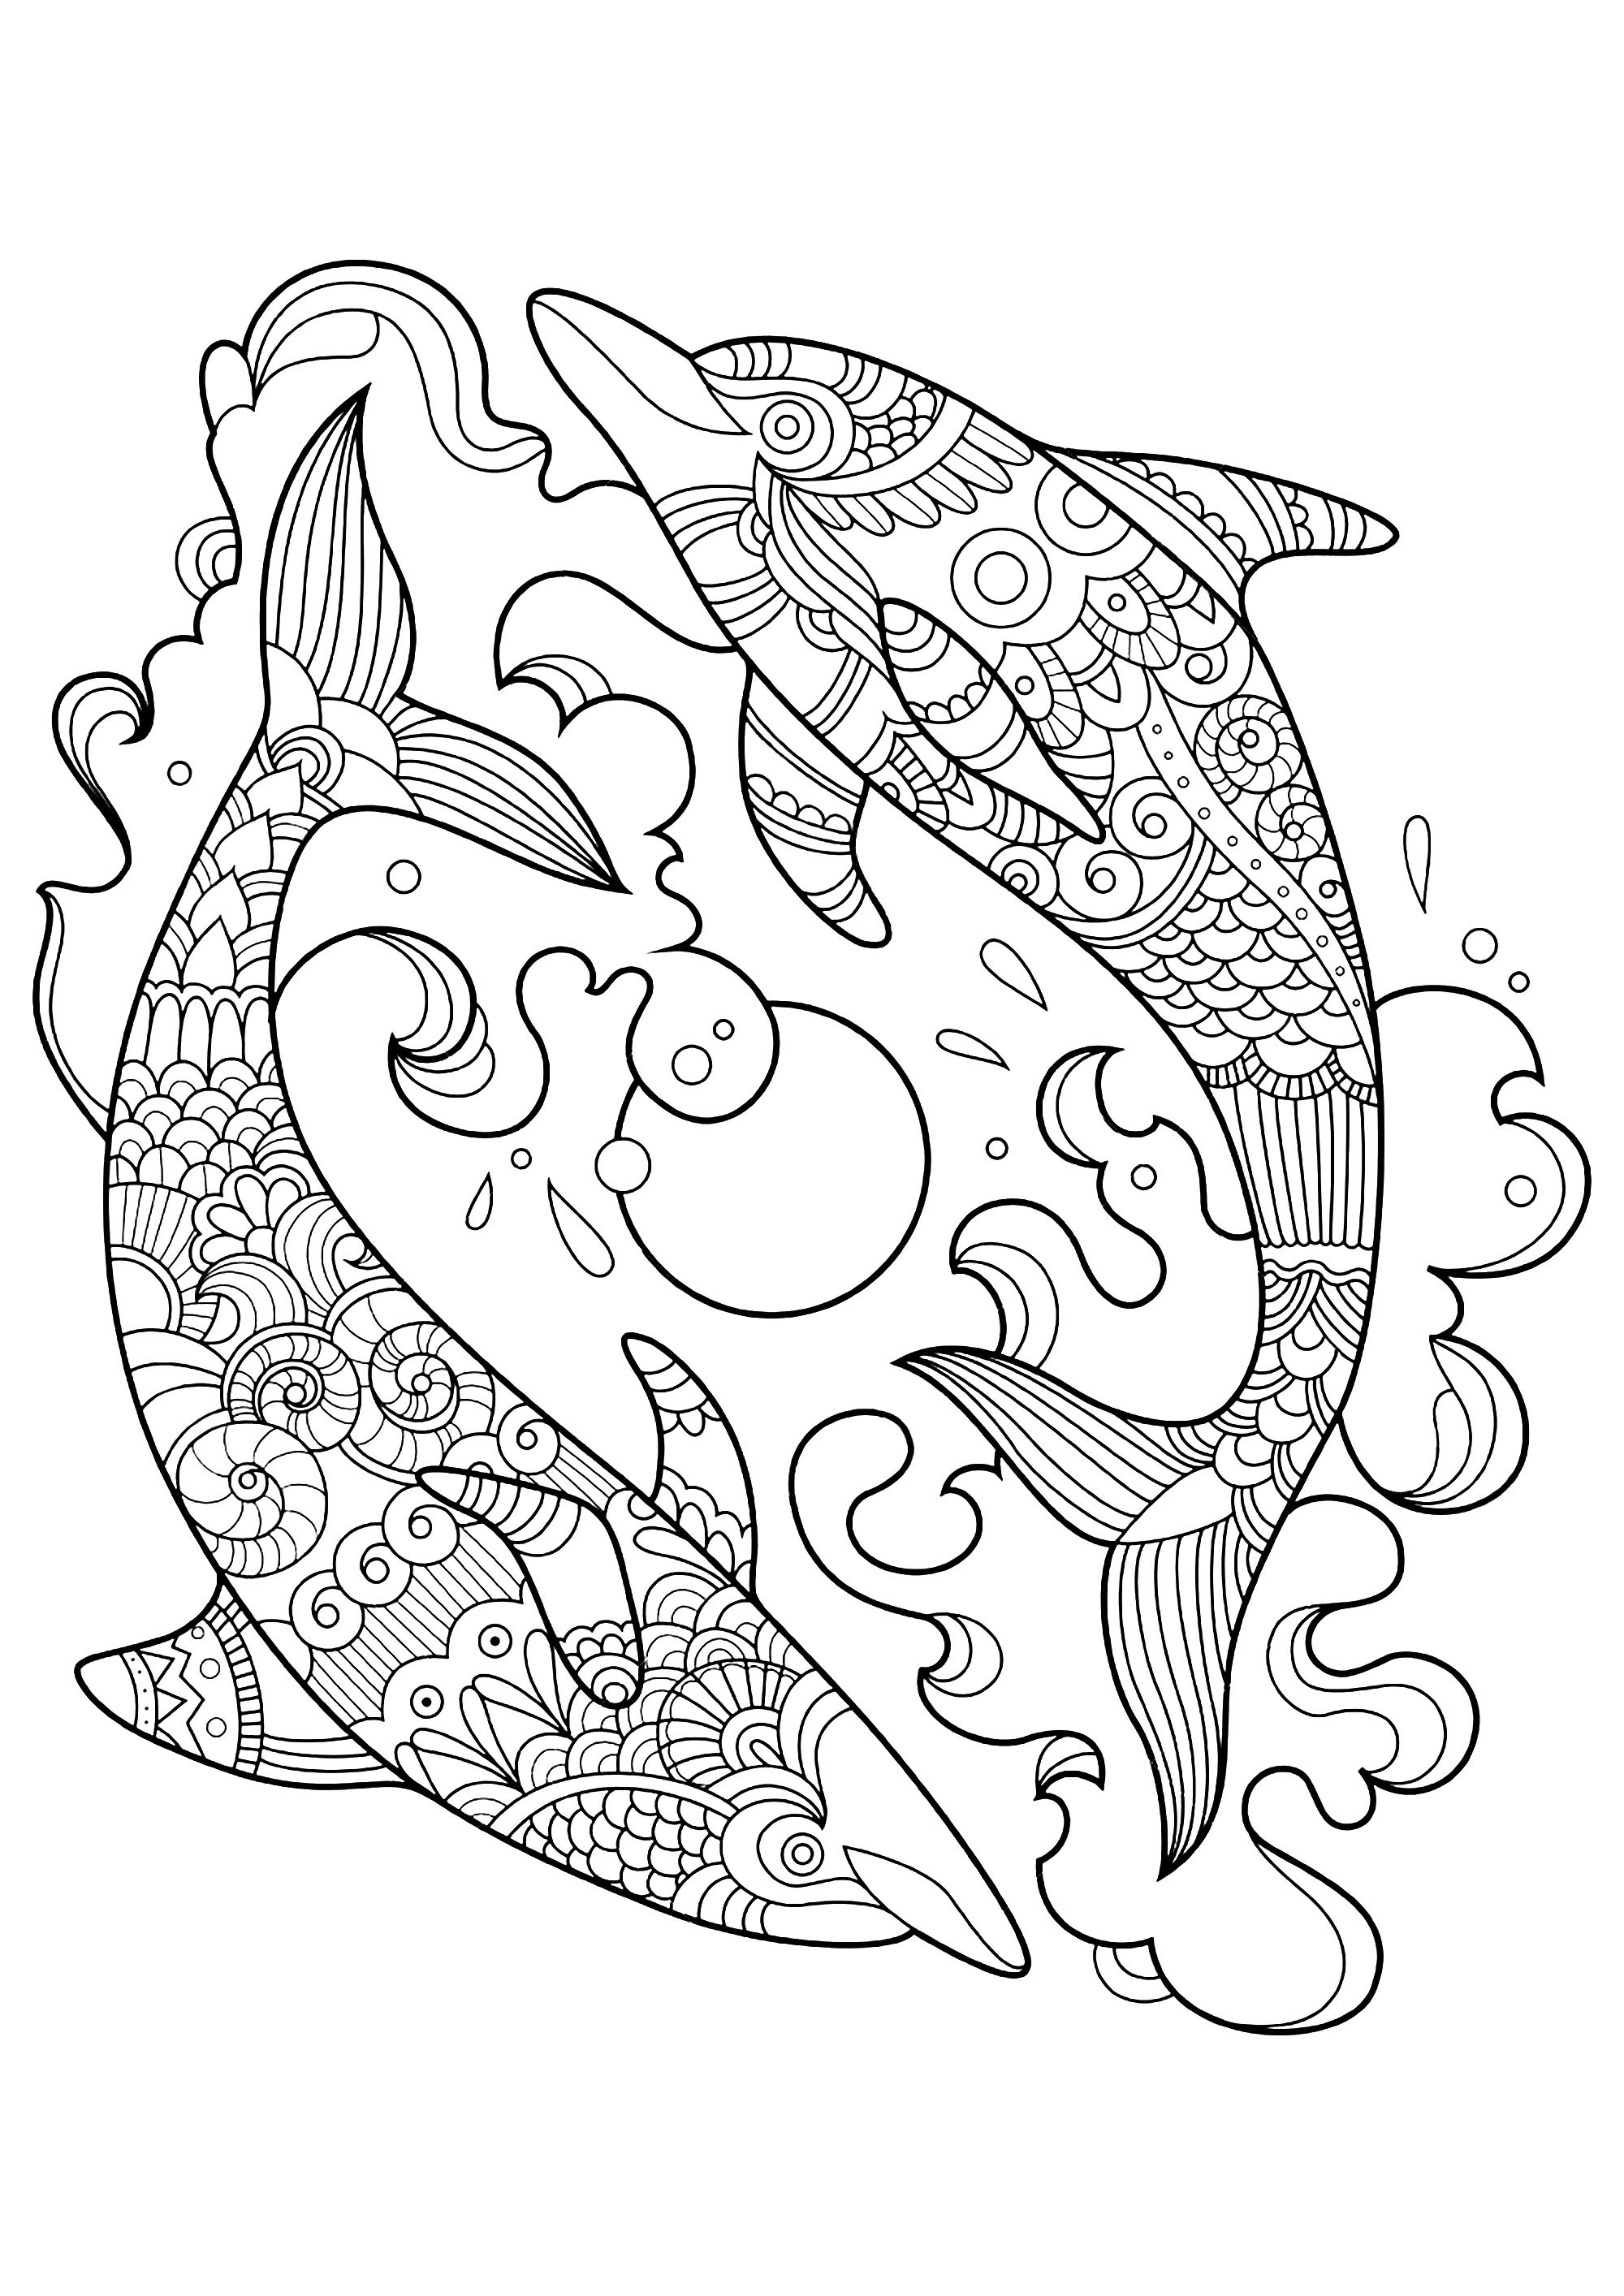 Dolphins to color for children - Dolphins Kids Coloring Pages